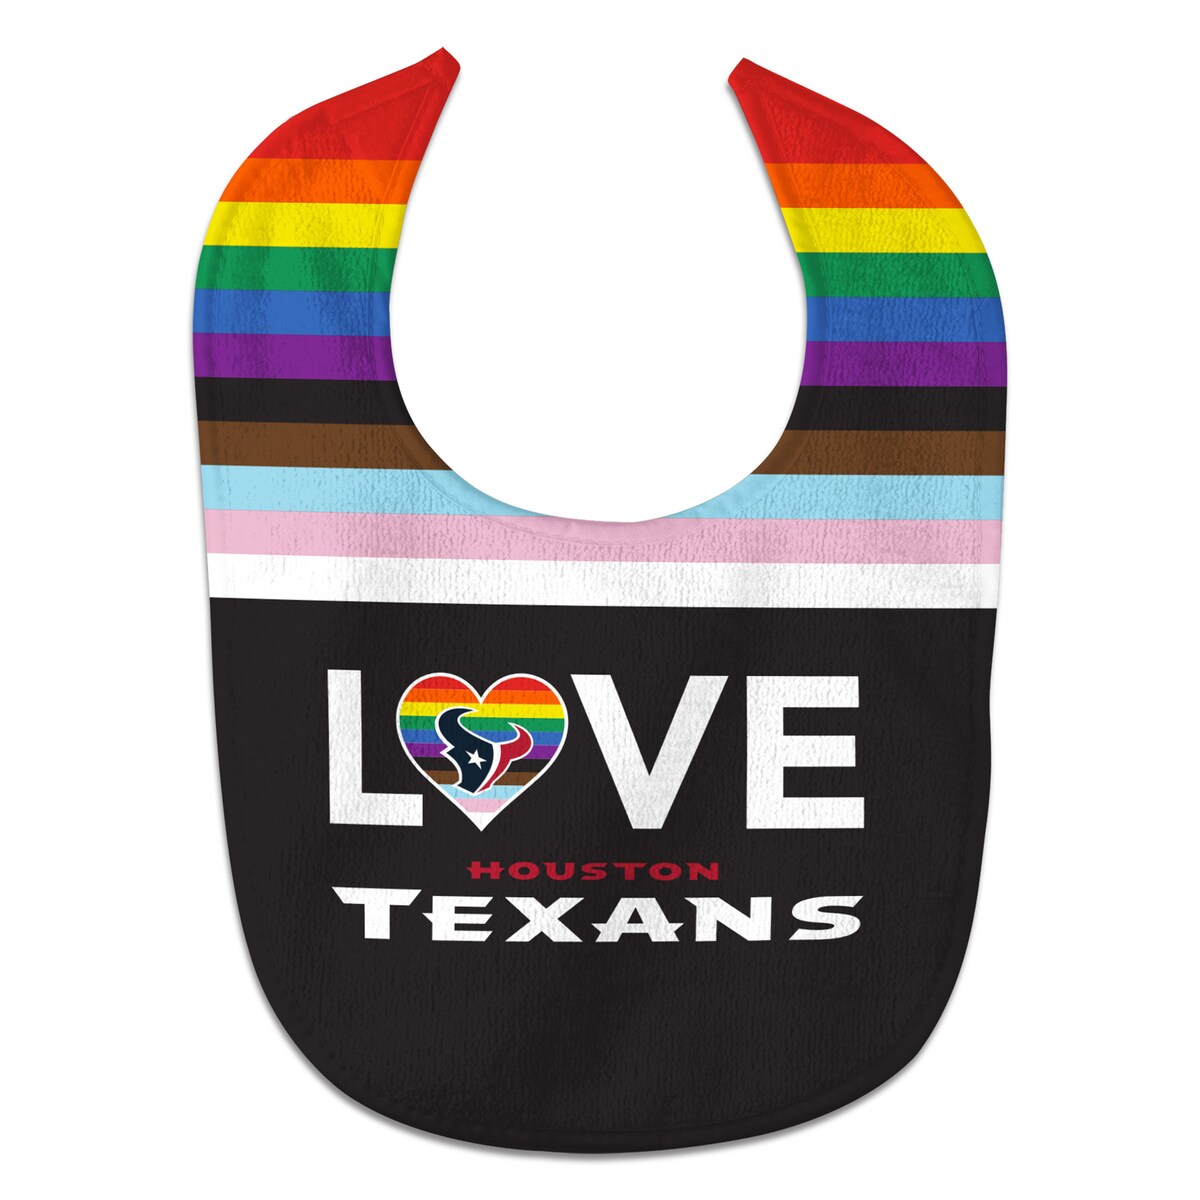 Love is love, especially when mealtime and the Houston Texans are involved. This baby bib from WinCraft is the perfect way to add some spirit and fun to messy activities. It features a vibrant Houston Texans design with rainbow details, filling every little bite with pride.Material: 55% Cotton/45% PolyesterMachine wash, tumble dry lowSublimated graphicsOfficially licensedBrand: WinCraftHook and loop closureImported